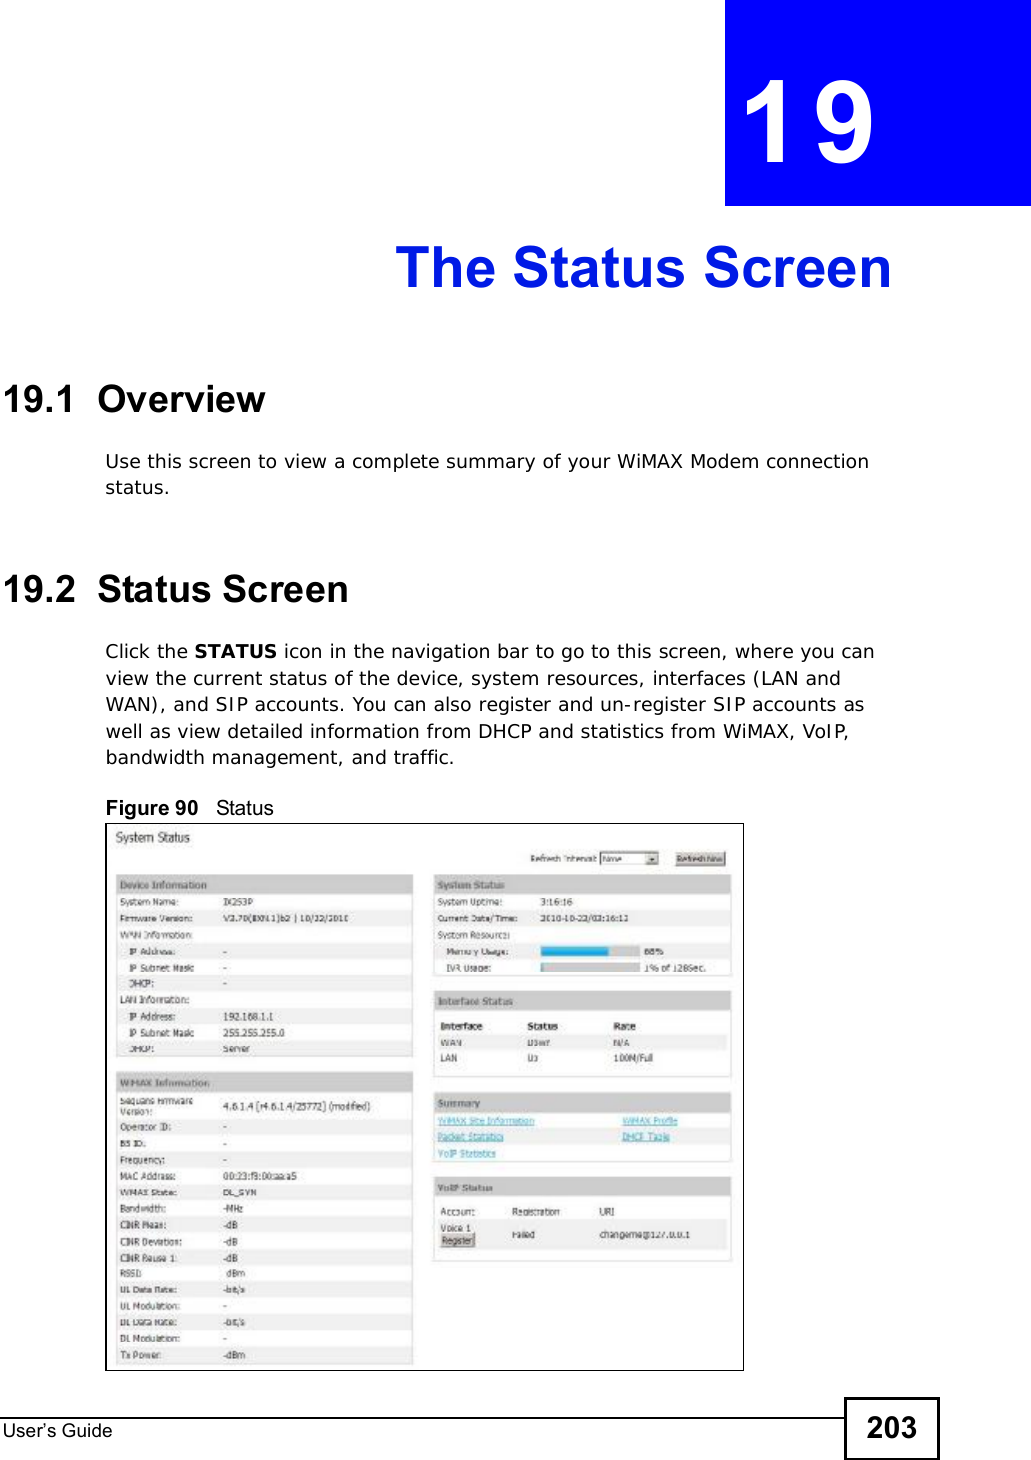 User s Guide 203CHAPTER 19The Status Screen19.1  OverviewUse this screen to view a complete summary of your WiMAX Modem connection status.19.2  Status ScreenClick the STATUS icon in the navigation bar to go to this screen, where you can view the current status of the device, system resources, interfaces (LAN and WAN), and SIP accounts. You can also register and un-register SIP accounts as well as view detailed information from DHCP and statistics from WiMAX, VoIP, bandwidth management, and traffic.Figure 90   Status